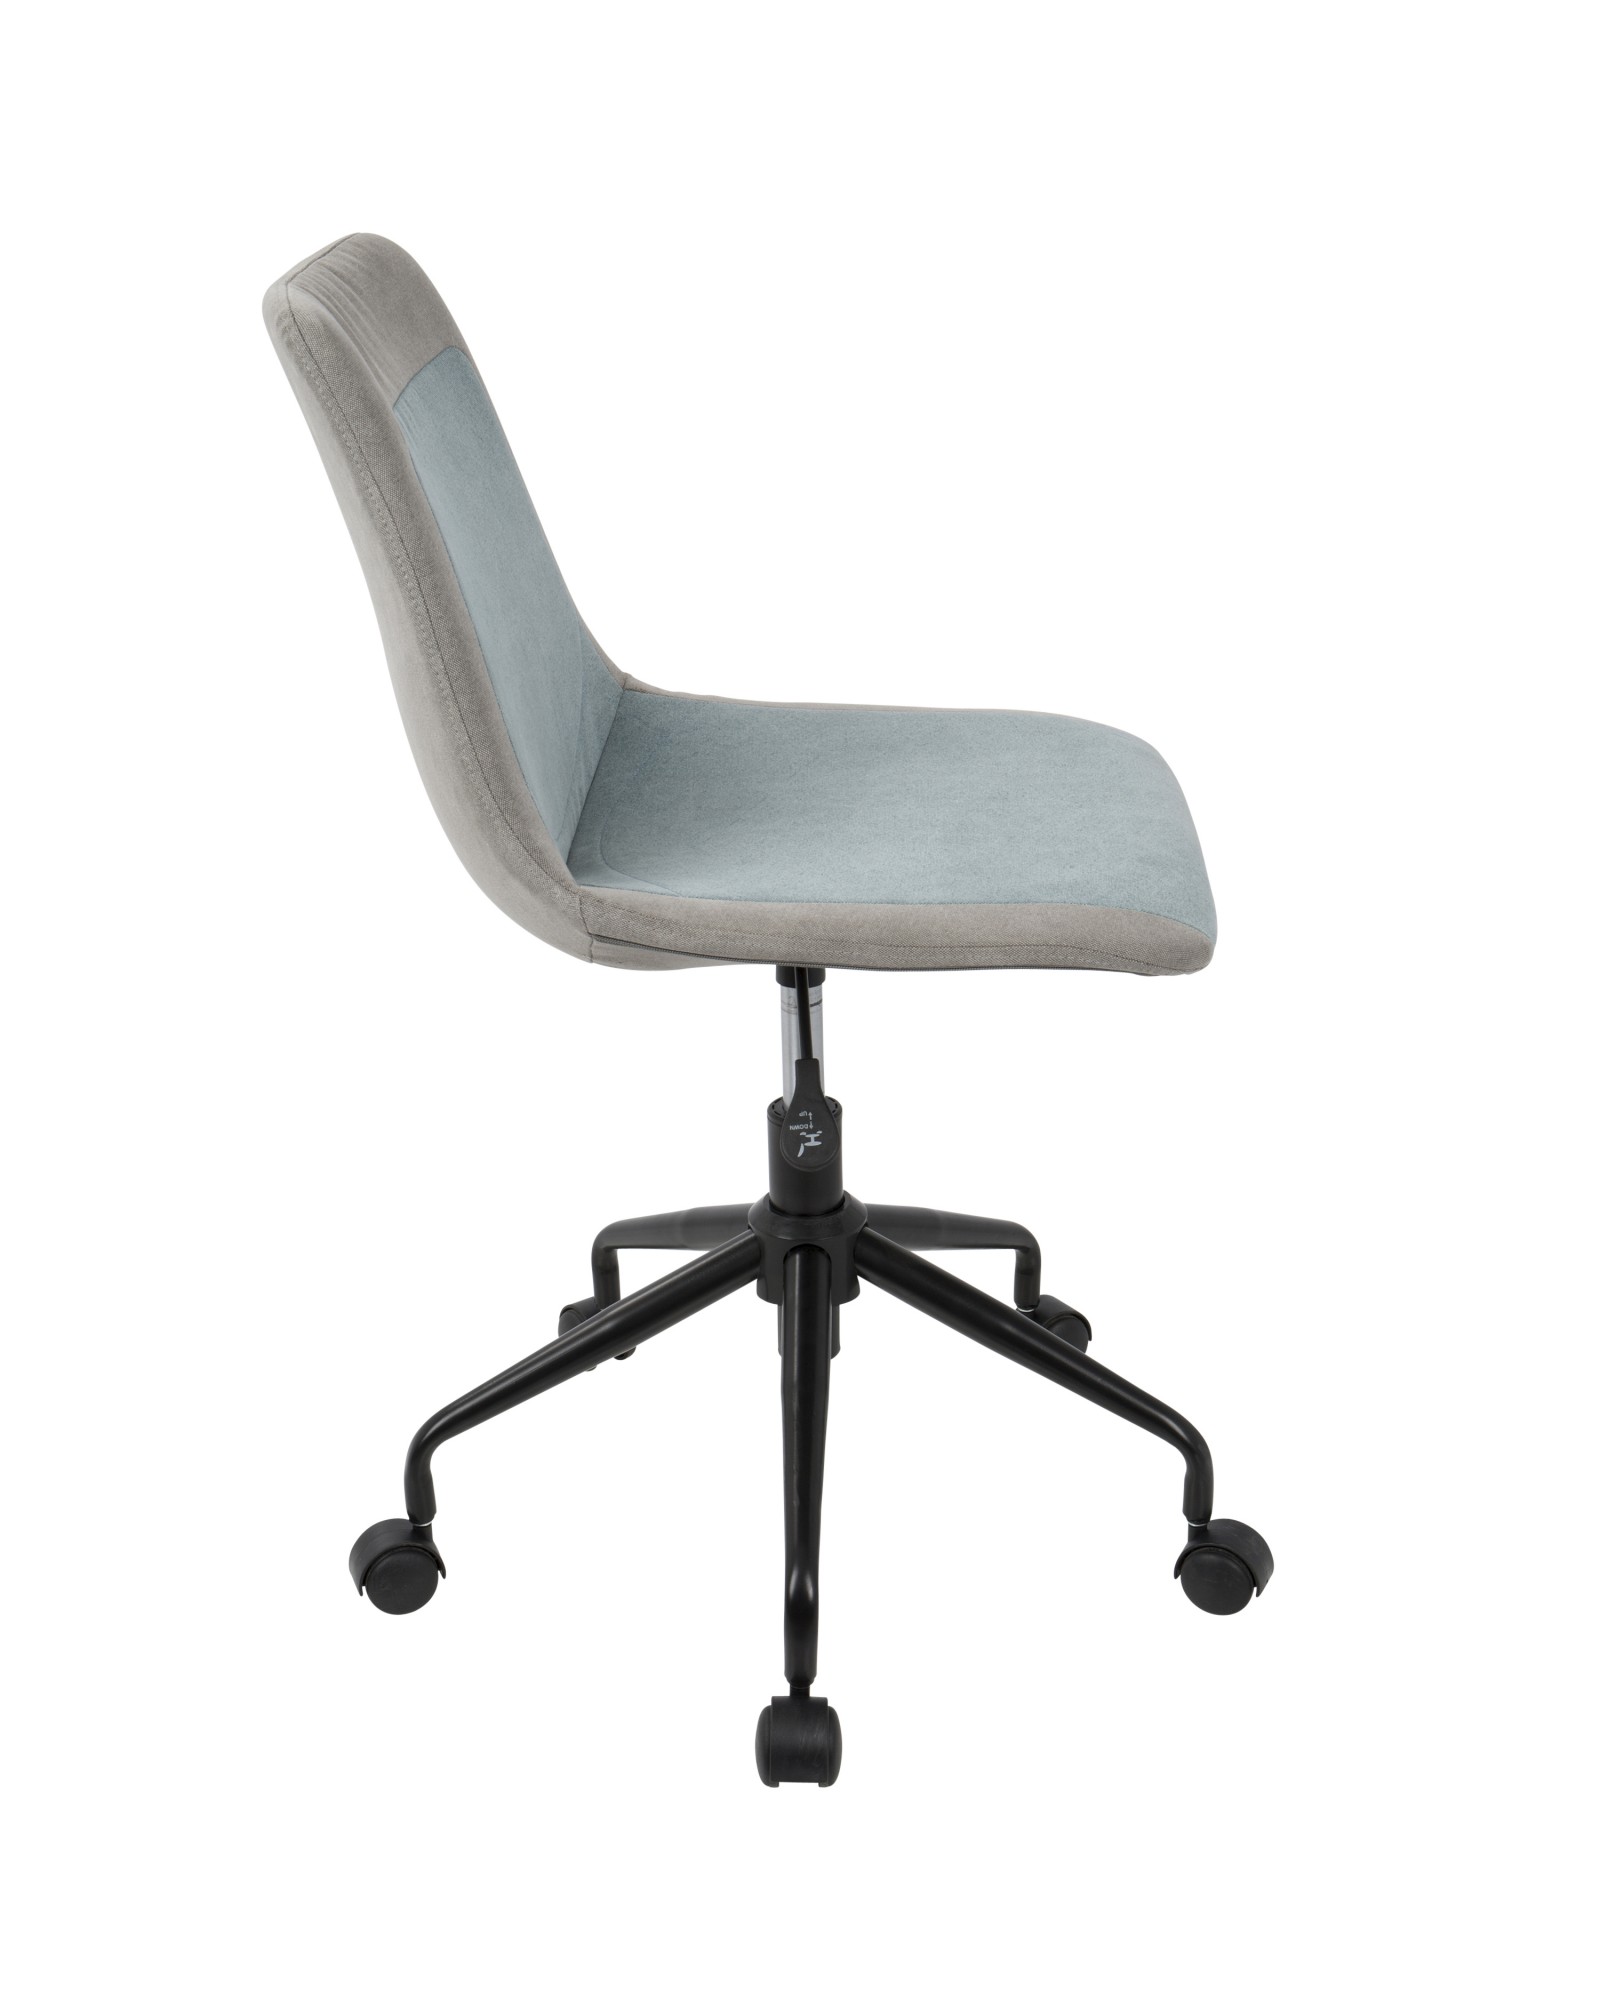 Orzo Height Adjustable Task Chair in Black with Blue Denim Fabric